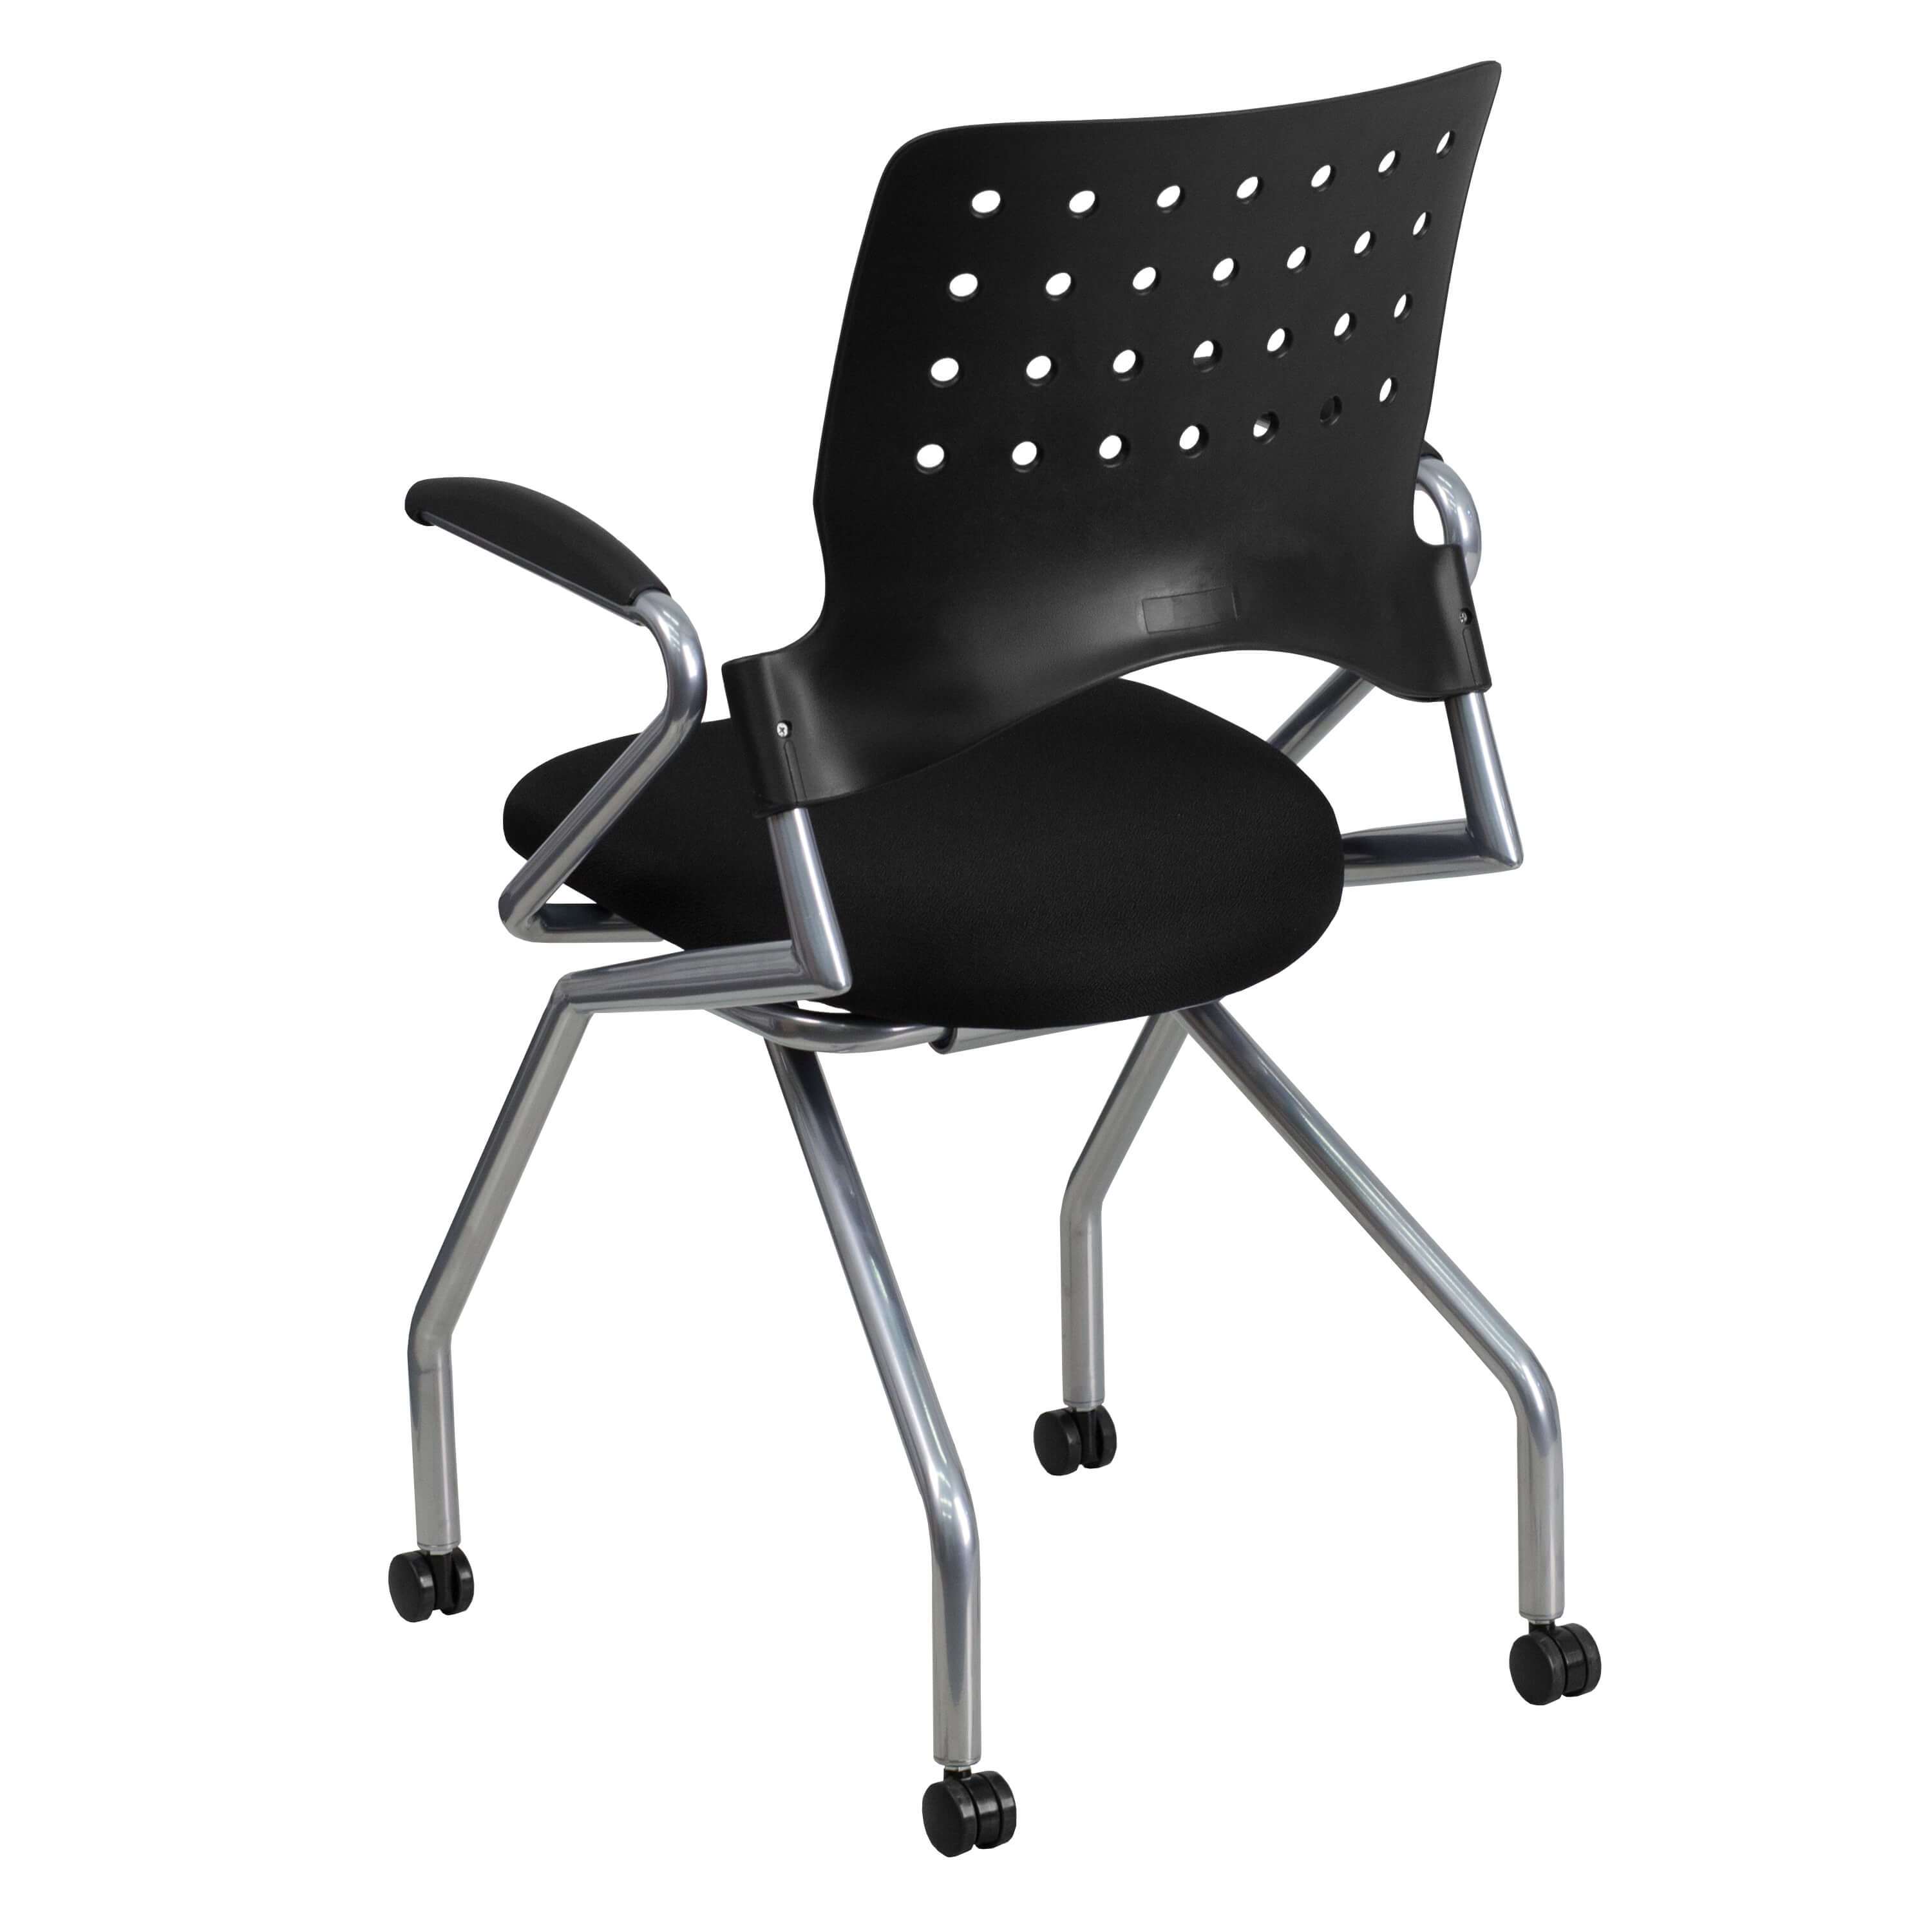 Plastic office chair back